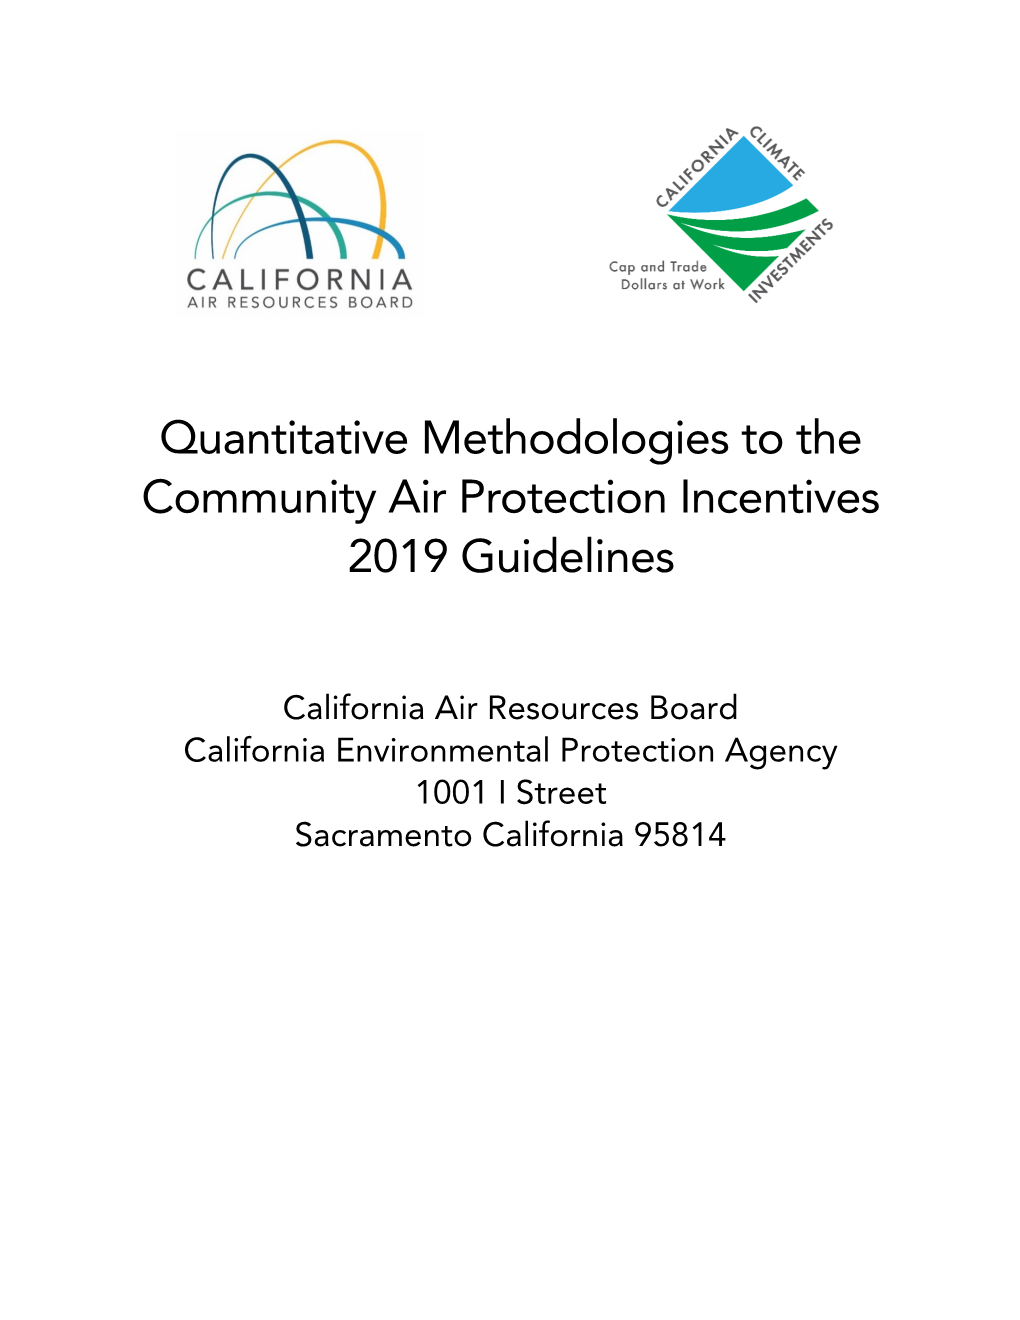 Quantitative Methodologies to the Community Air Protection Incentives 2019 Guidelines